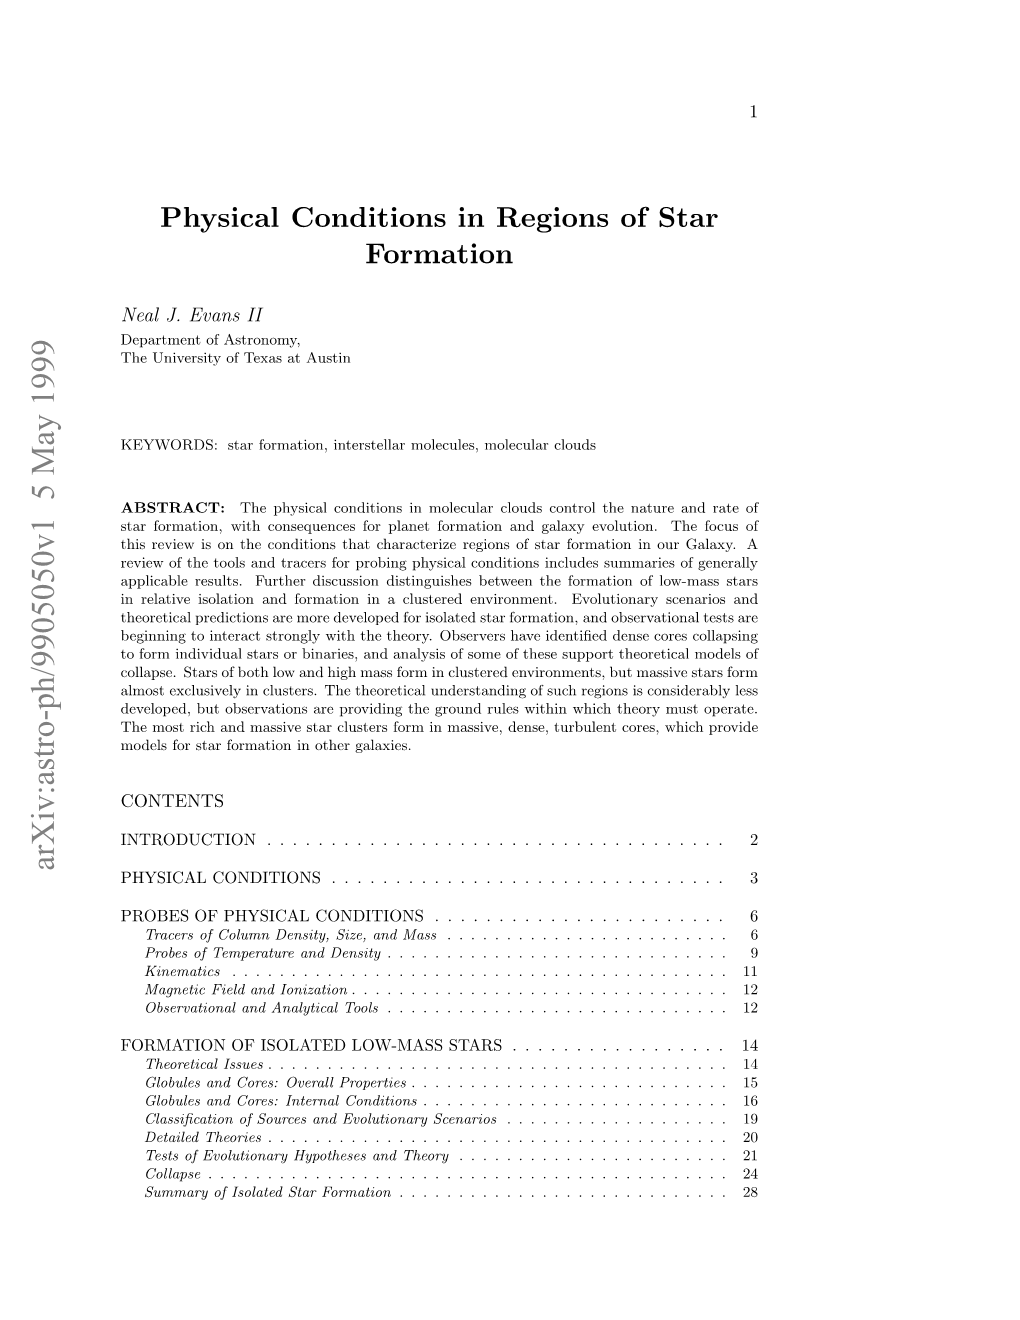 Physical Conditions in Regions of Star Formation